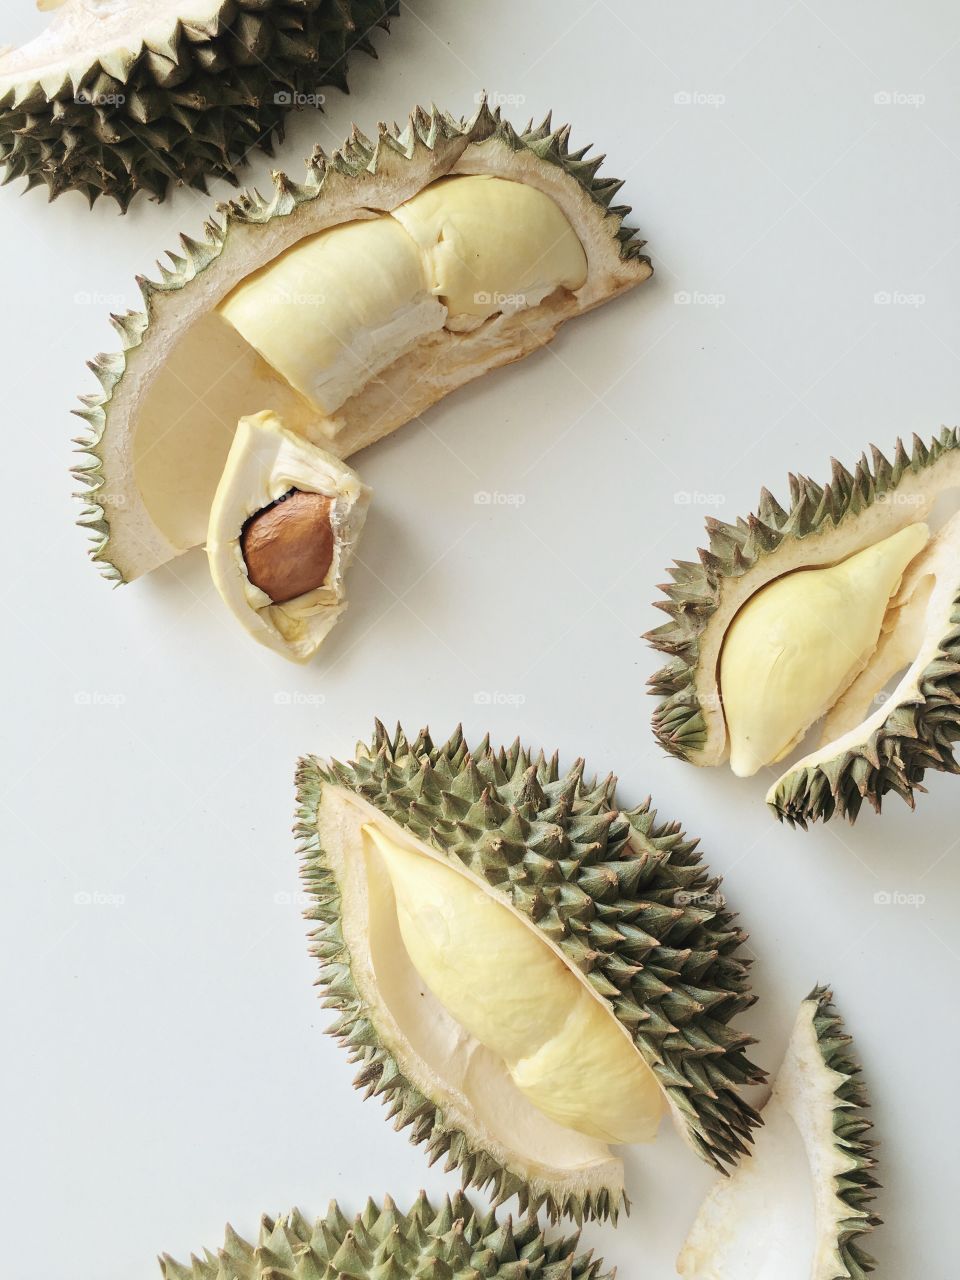 Durian is a queen of Thai fruits, the most popular fruit in Thailand.